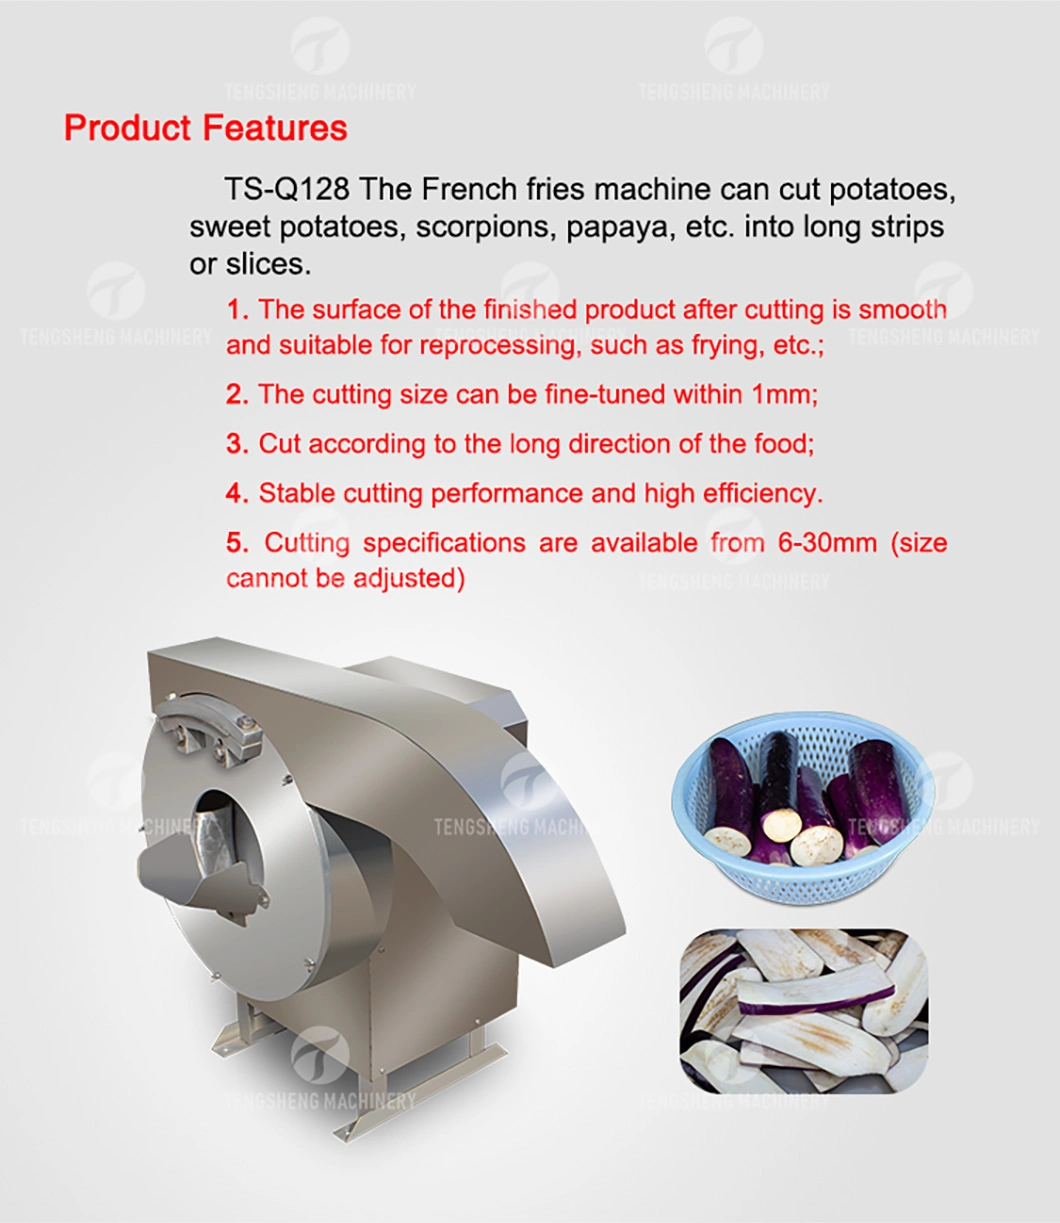 Industrial Potato Chips Cutting Machine French Fries Cutter Food Processor (TS-Q128)